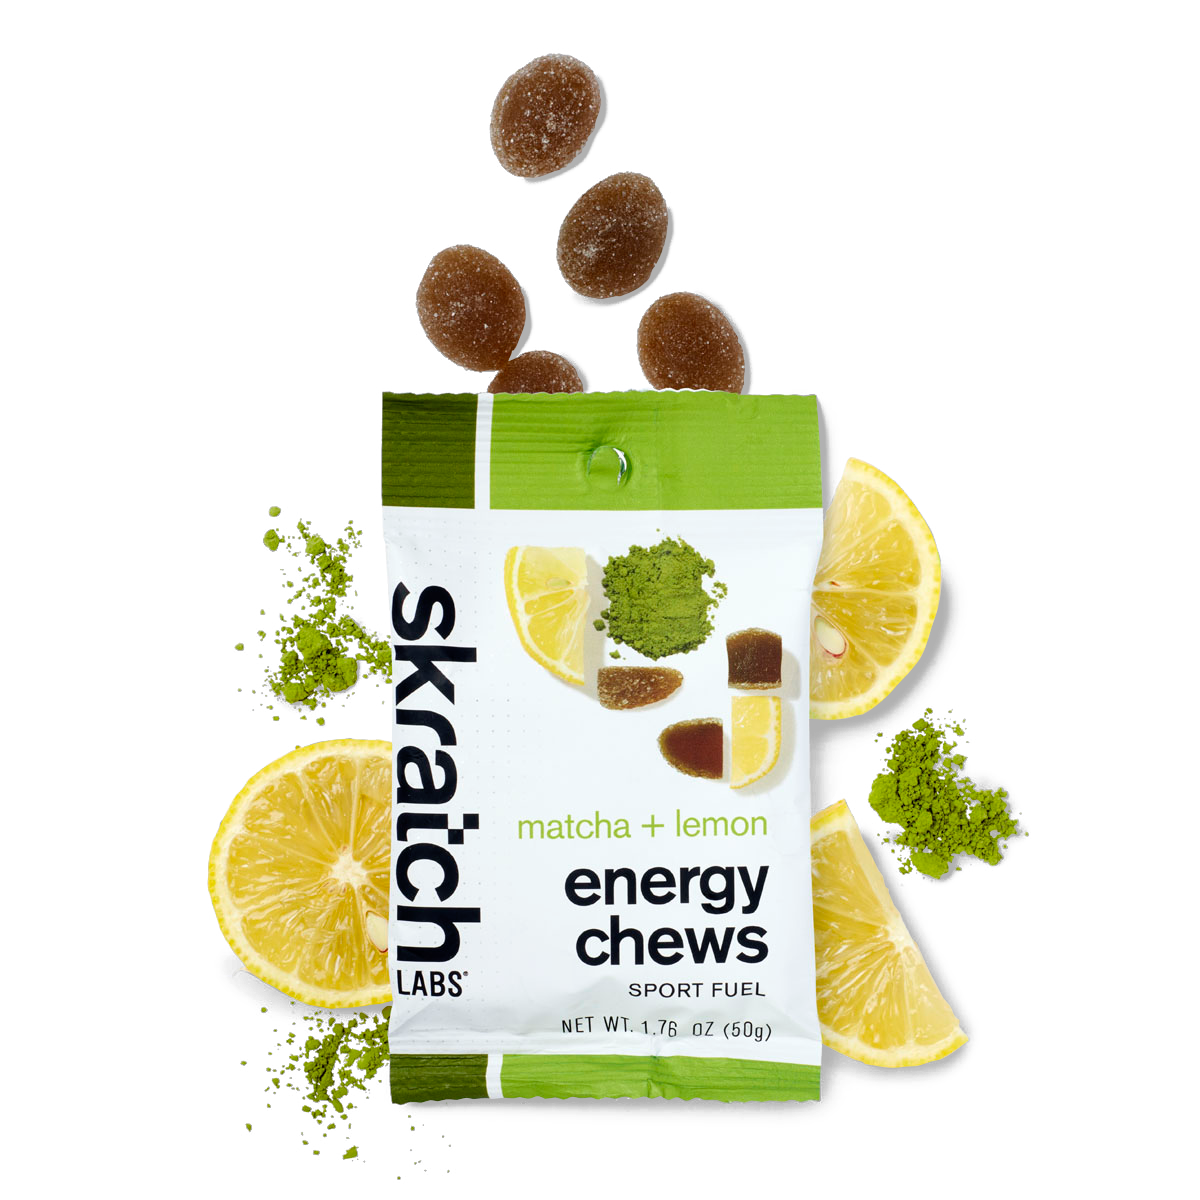 A packet of Skratch Labs Matcha and Lemon Energy Chews 